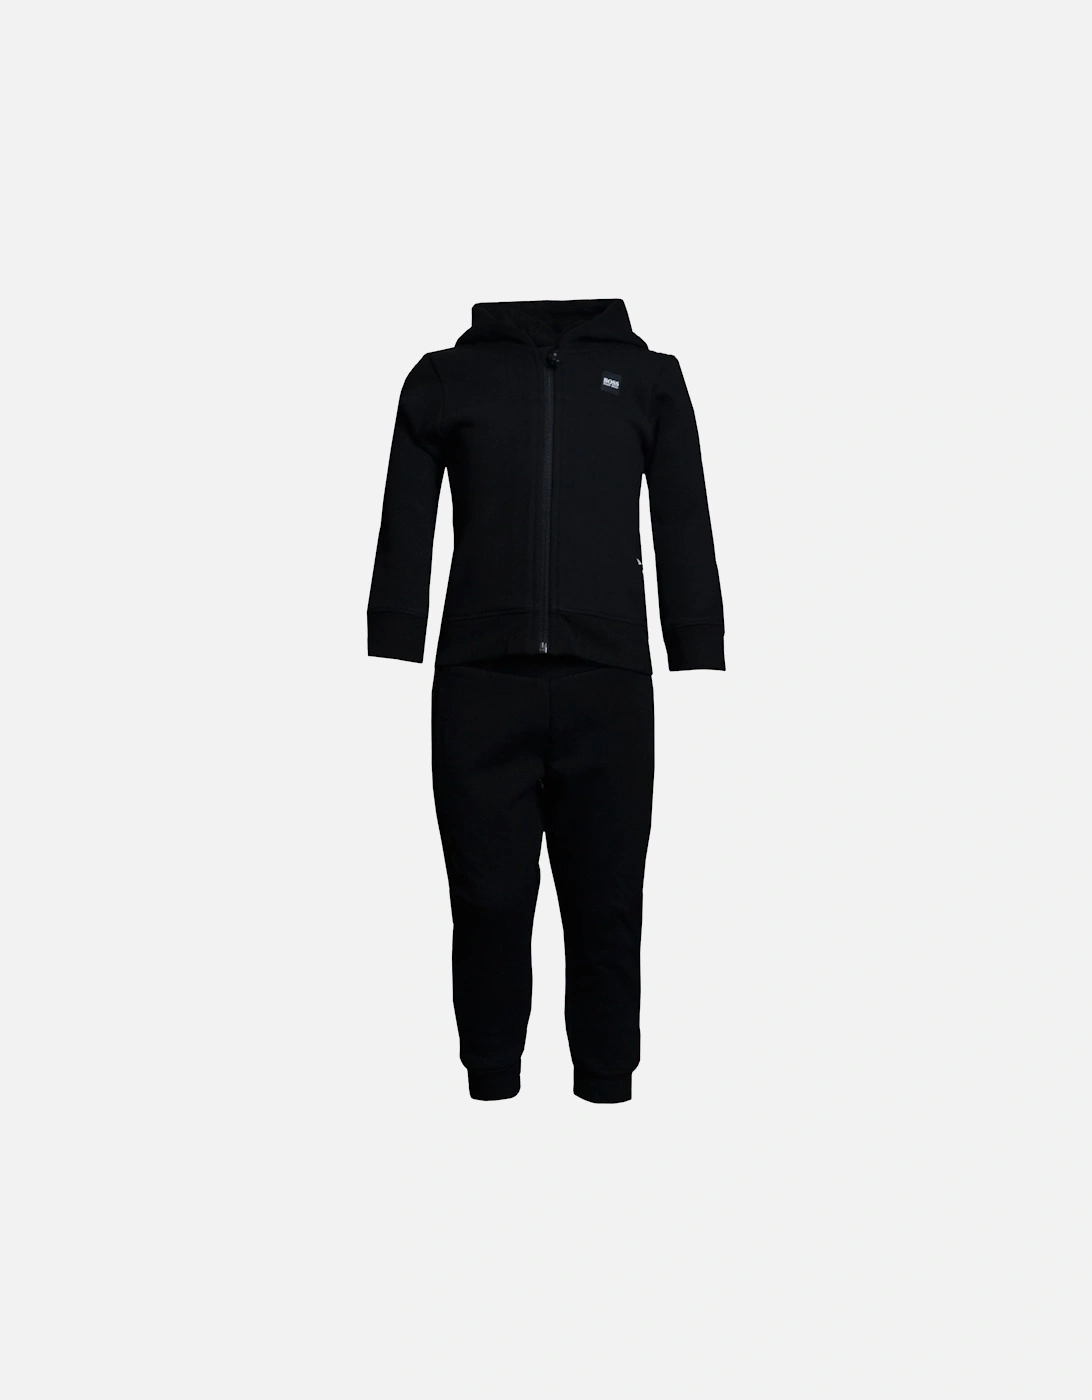 Hugo Boss Infants Black Tracksuit- [Size: 2 years only]